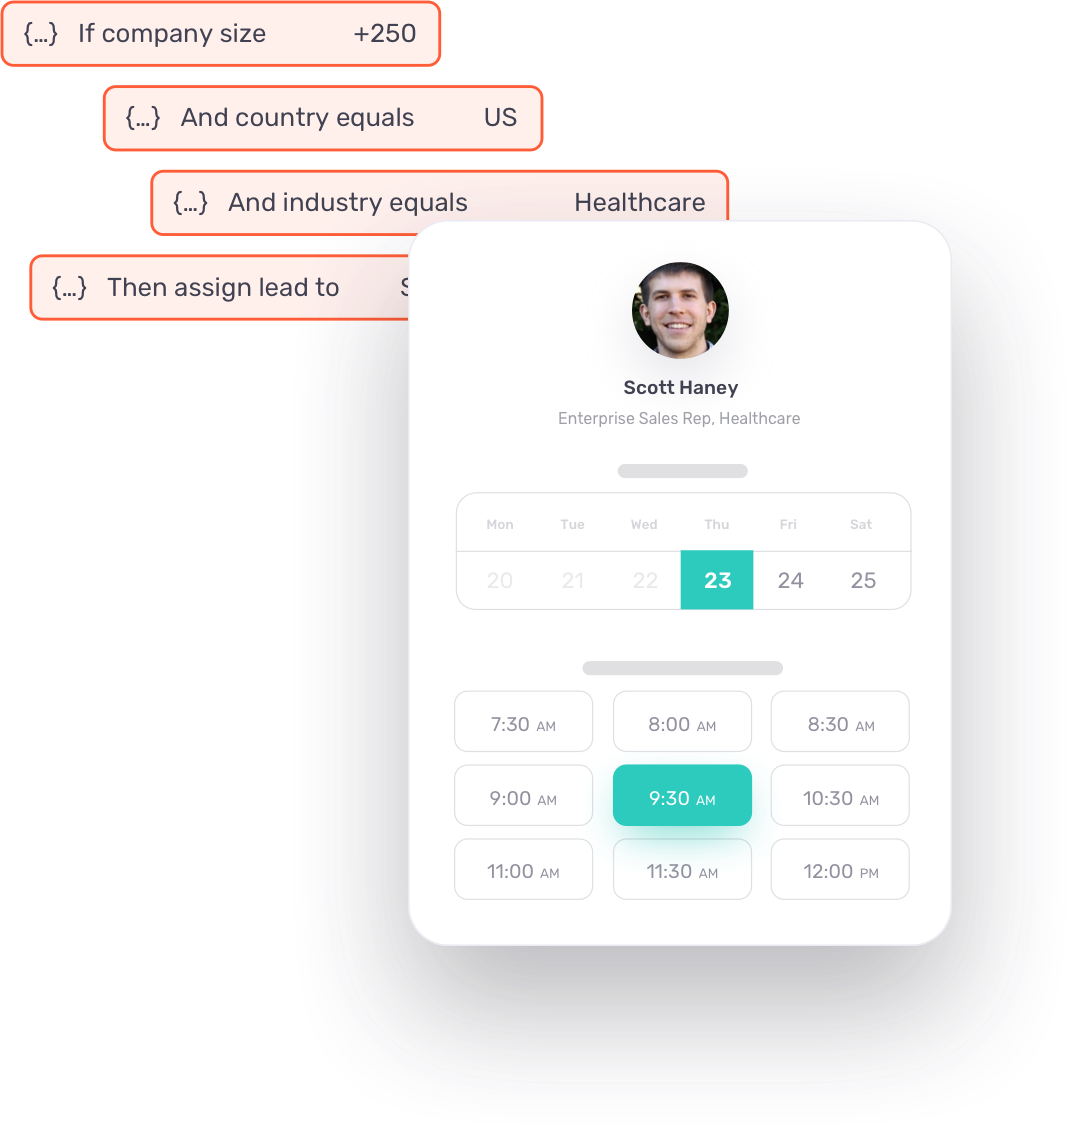 Chili Piper Inbound Lead Conversion And Appointment Scheduling App